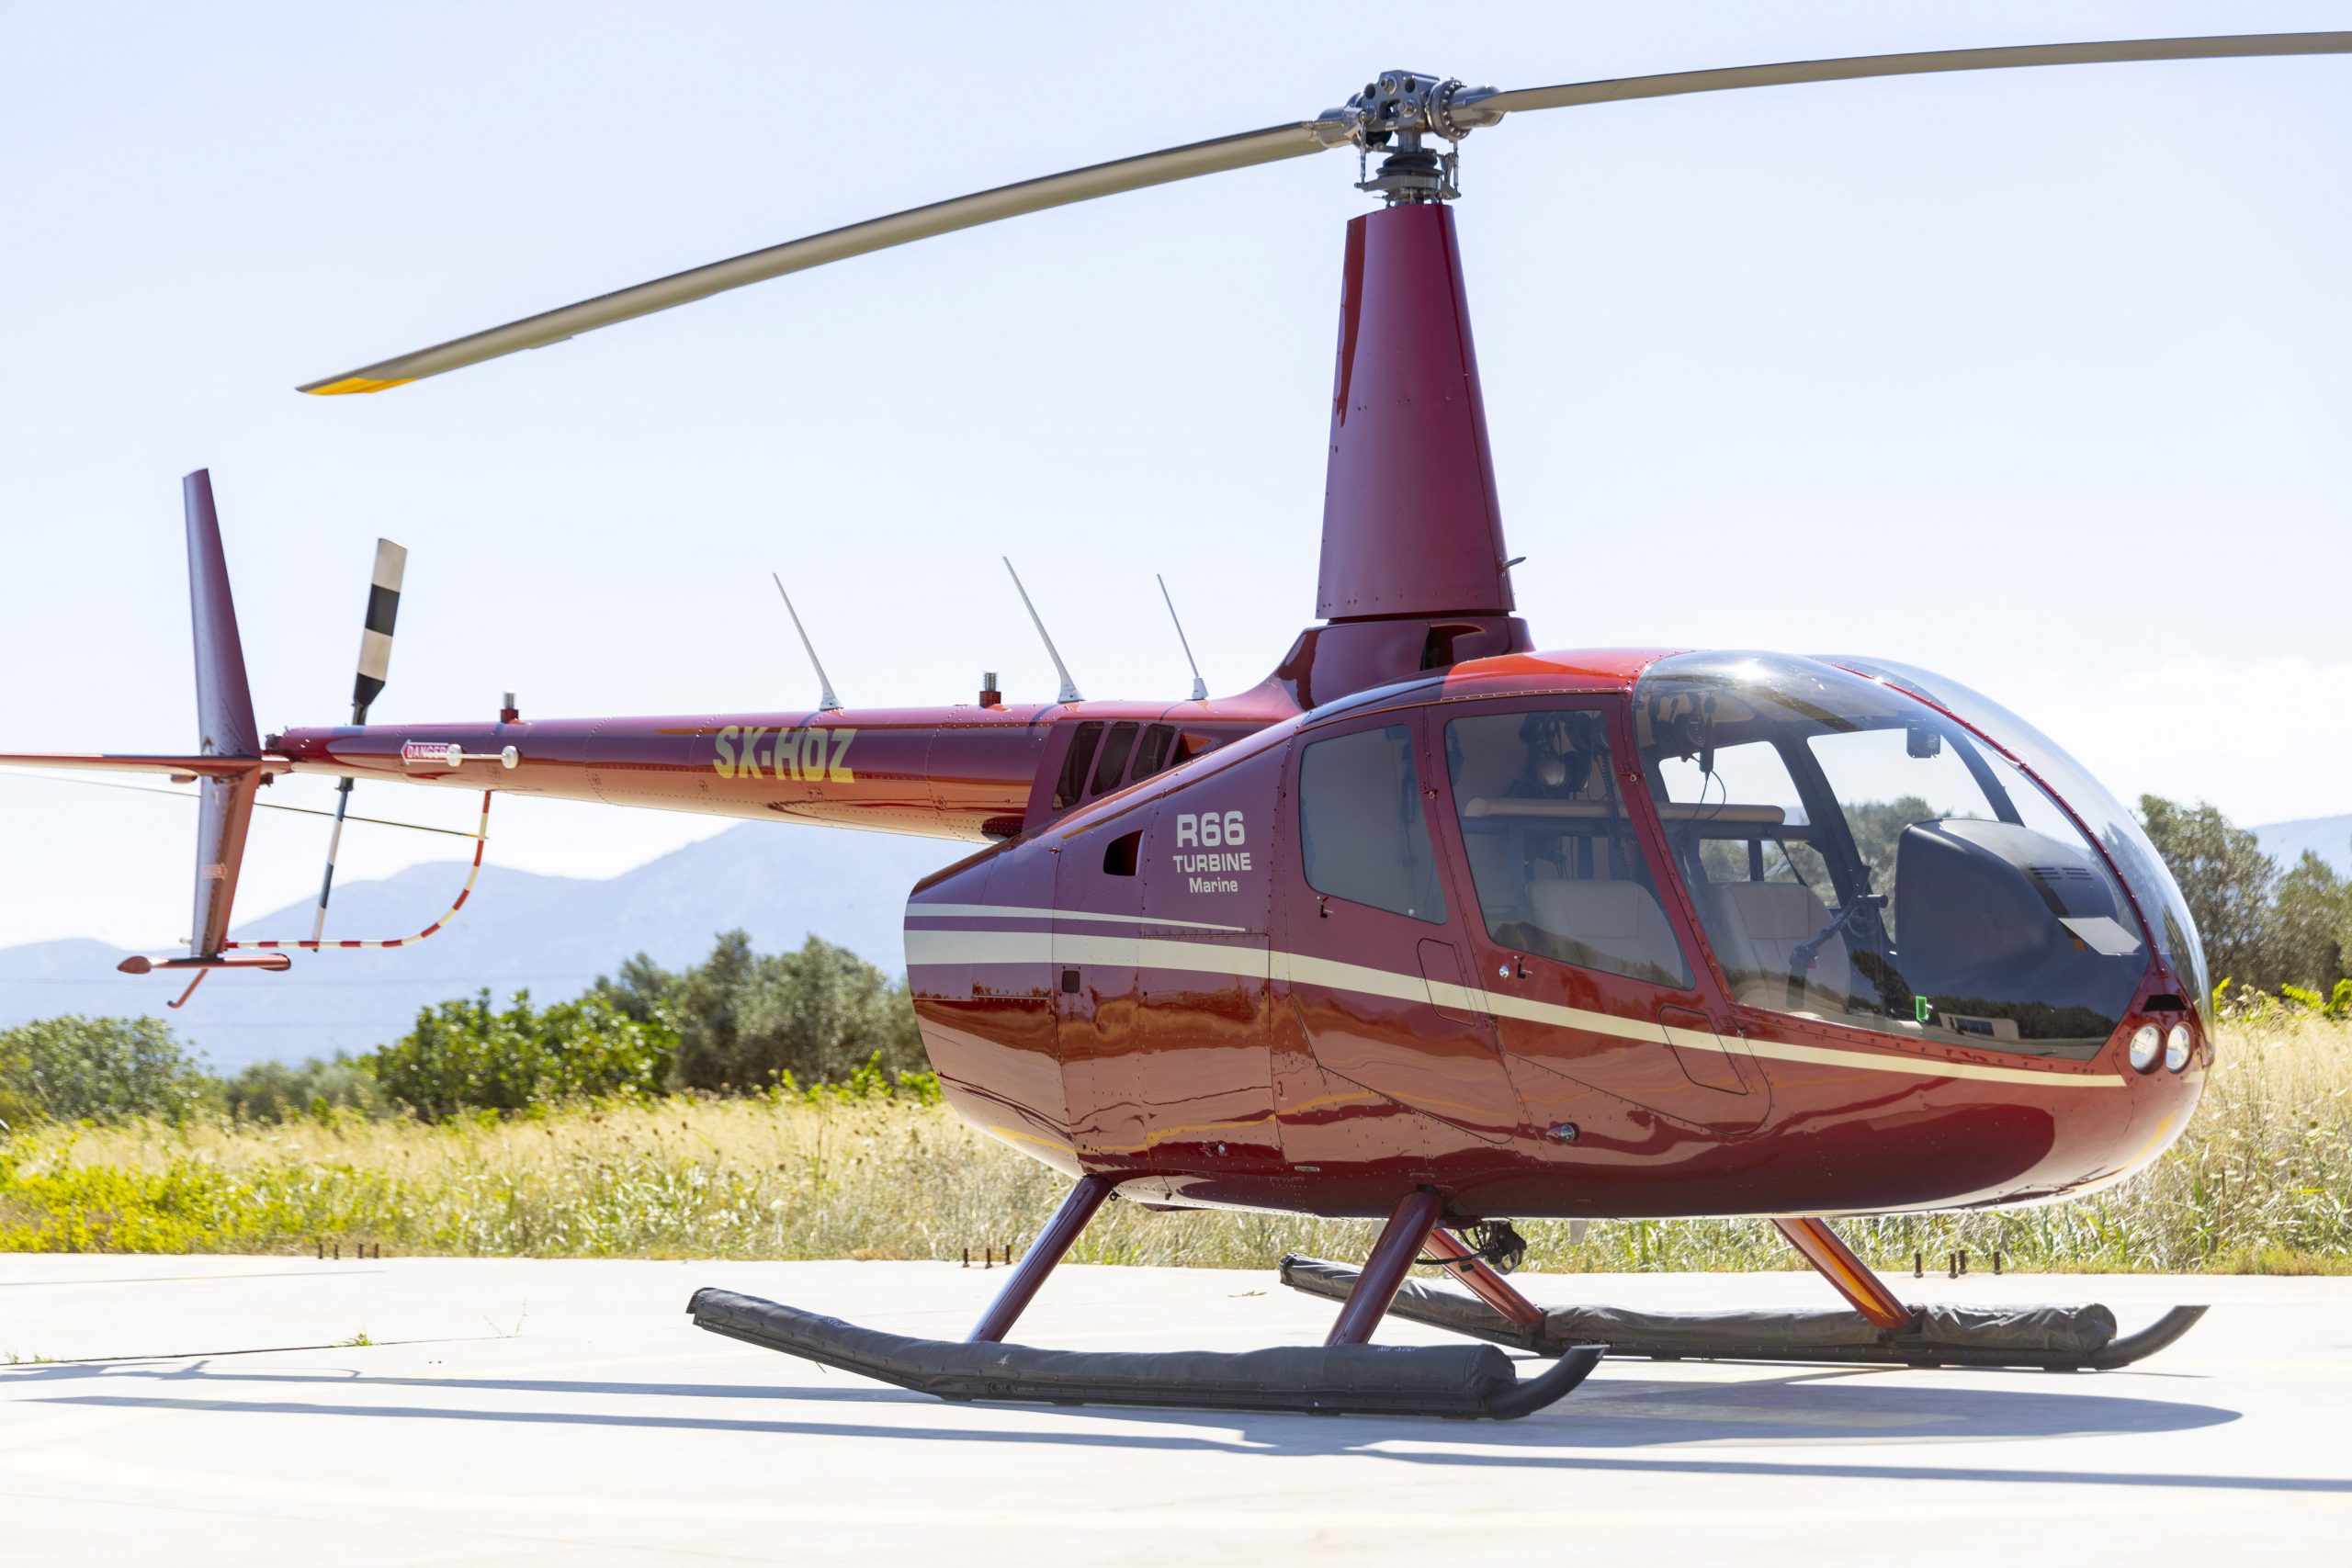 R66 Helicopter For Sale Best Image